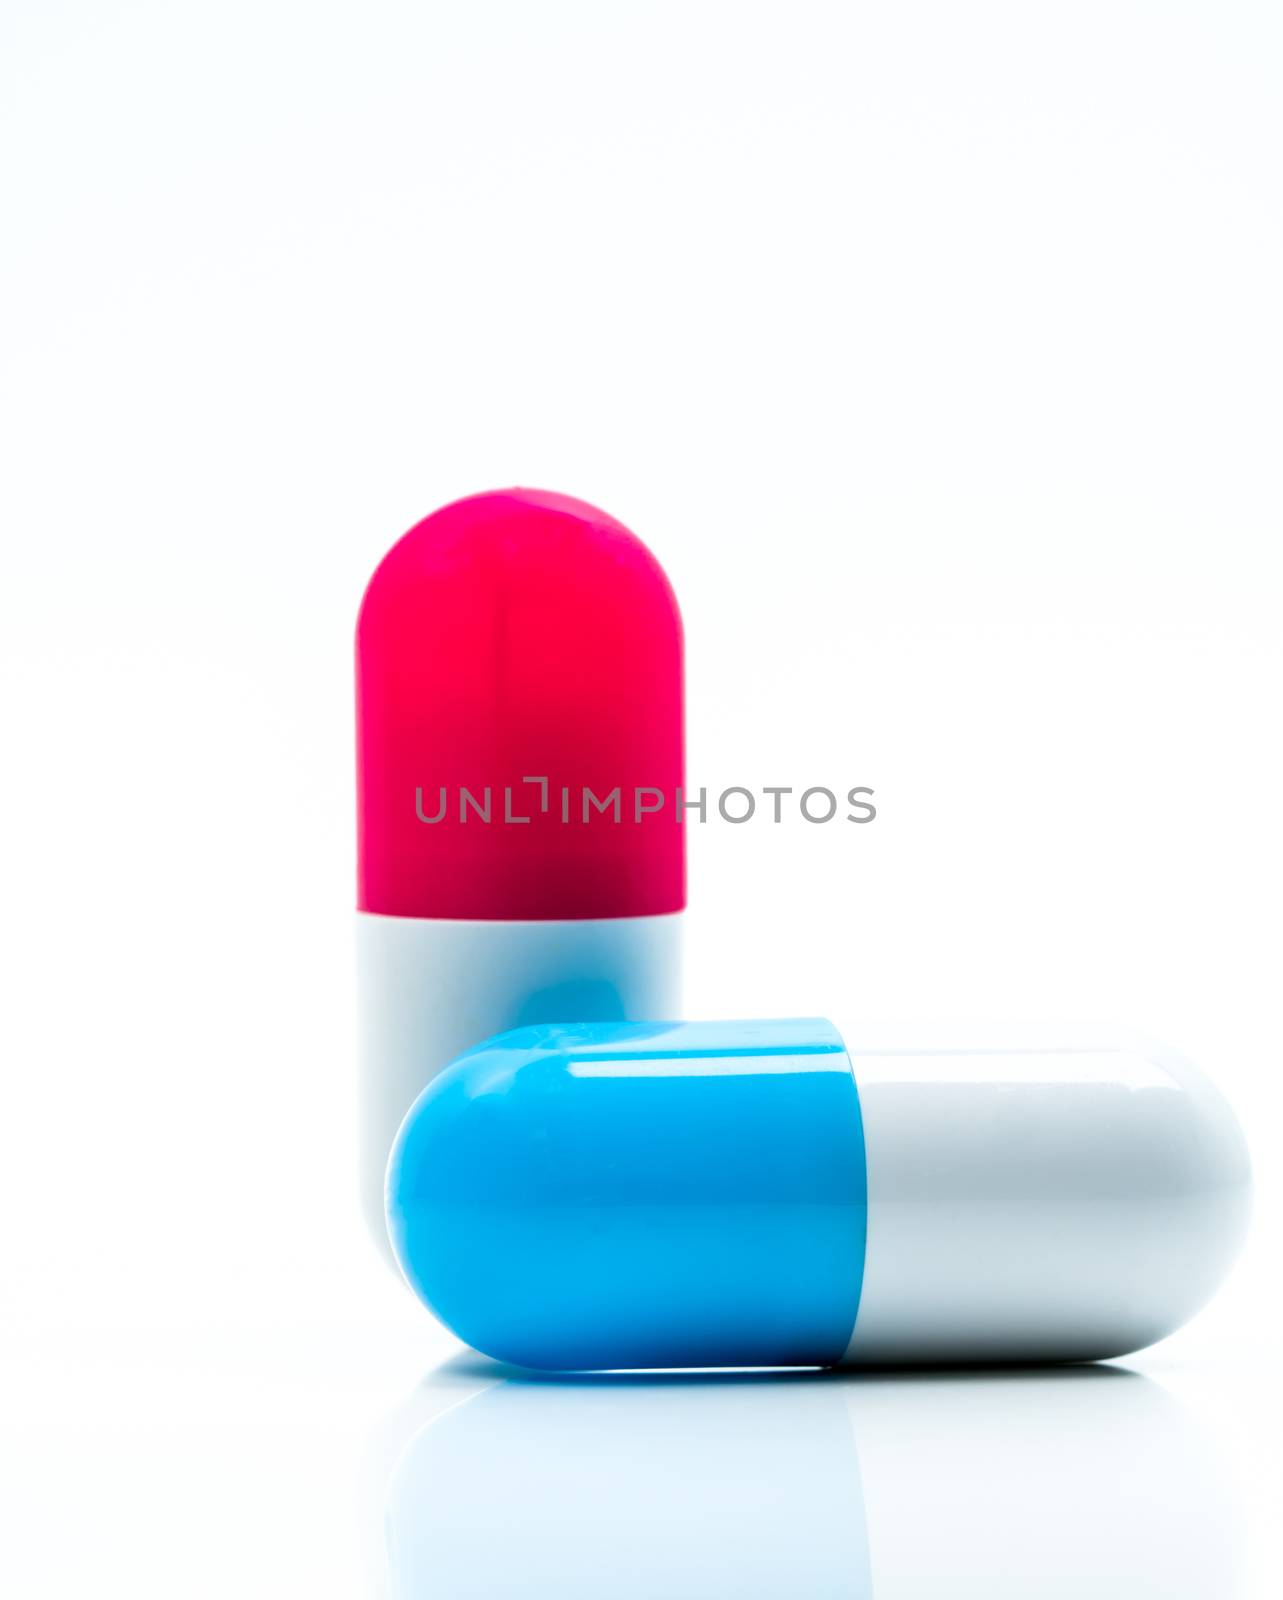 Two capsule pills isolated on white background. Global healthcare concept. Pharmacy sign and symbol. Pharmaceutical industry. Pharmacy background. Global healthcare concept. Antibiotic or antimicrobial drug resistance. Health budgets and policy. Blue-white and red-white antibiotic capsule. by Fahroni